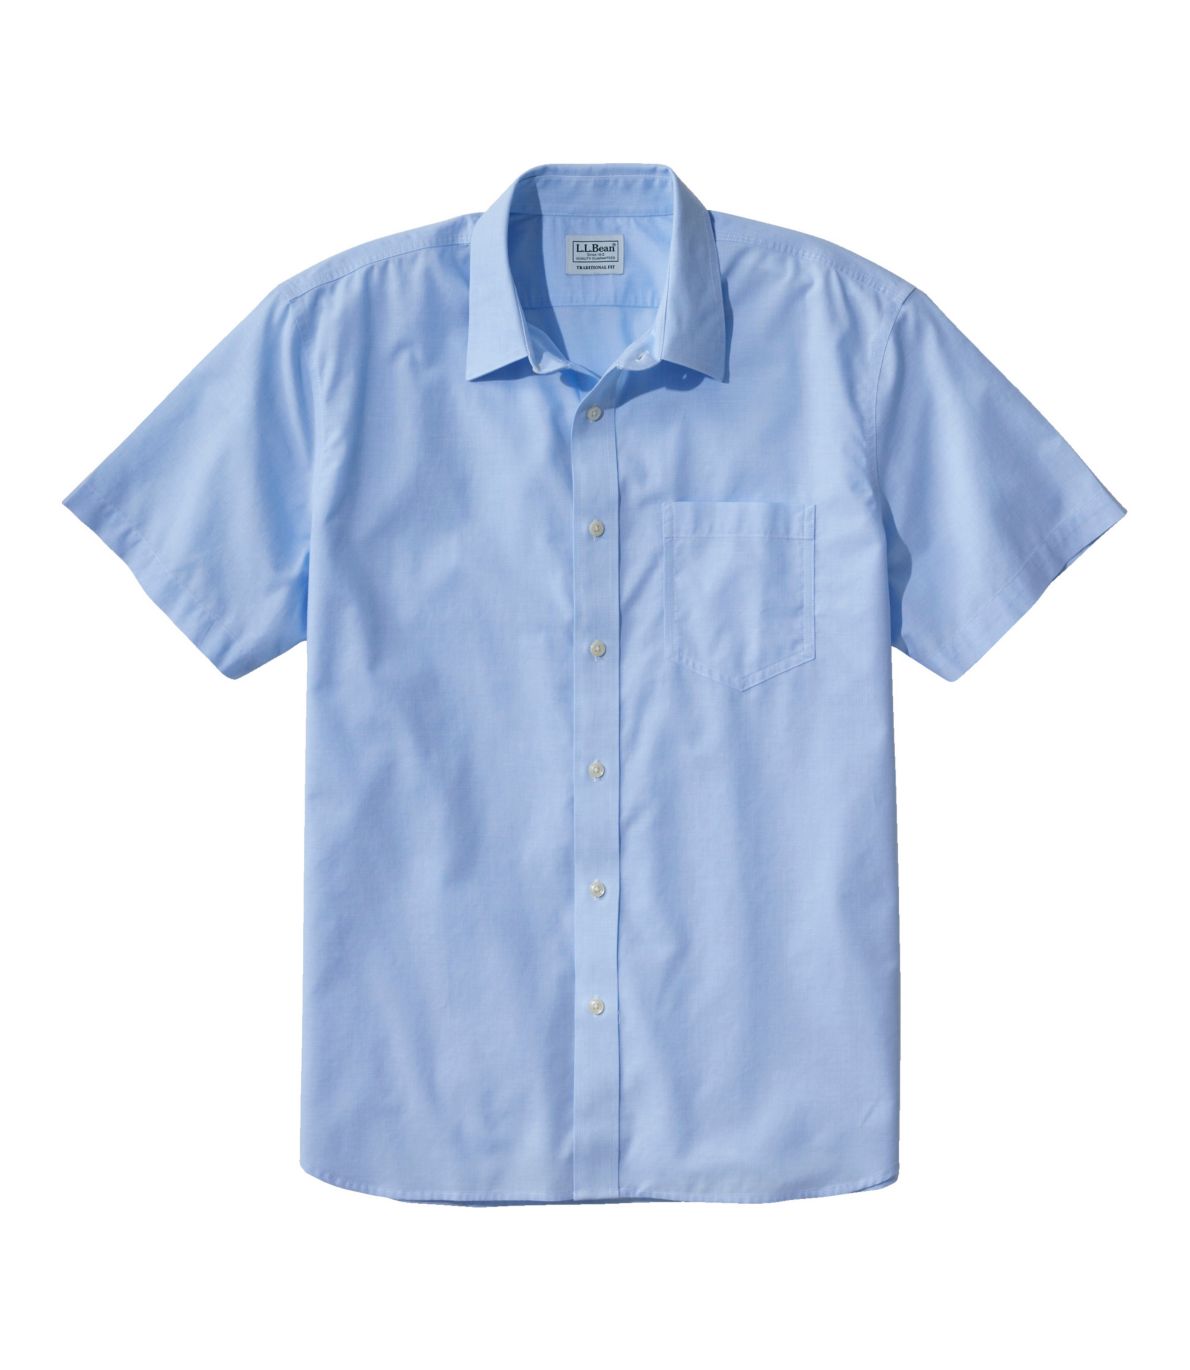 Men's Wrinkle-Free Everyday Shirt, Traditional Untucked Fit, Short-Sleeve